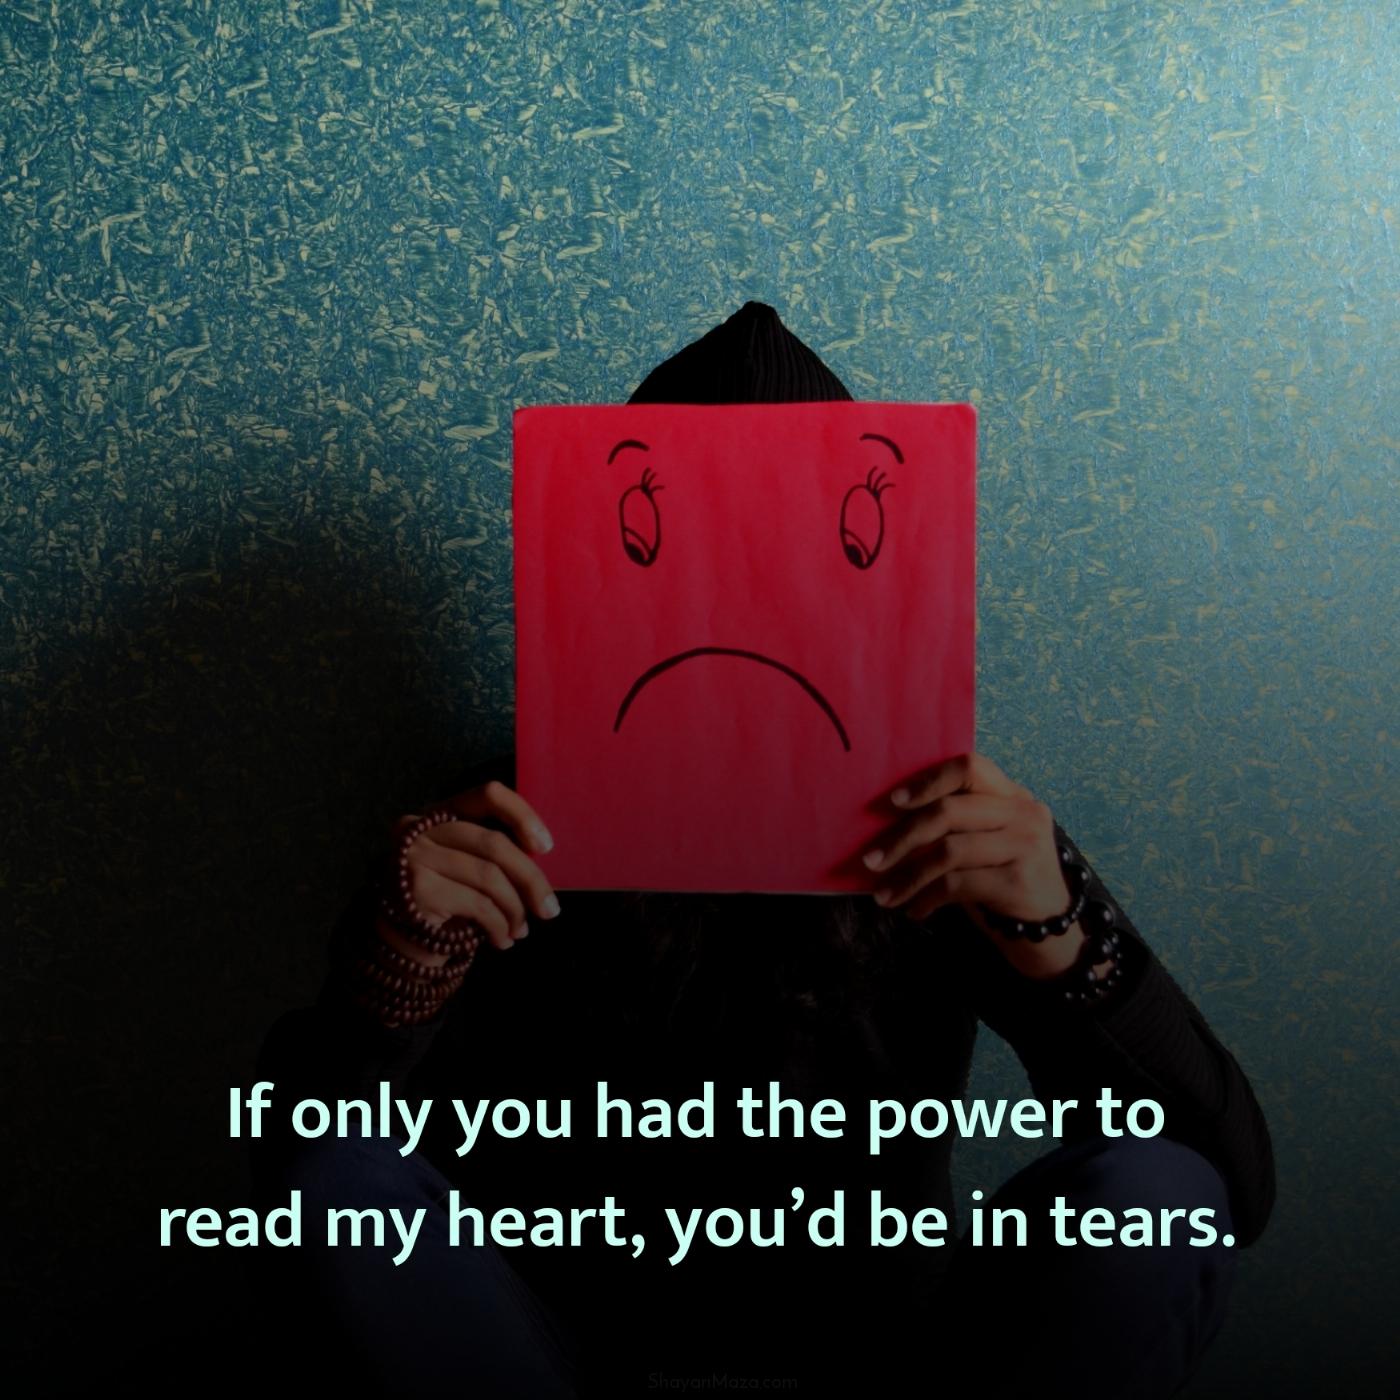 If only you had the power to read my heart youd be in tears